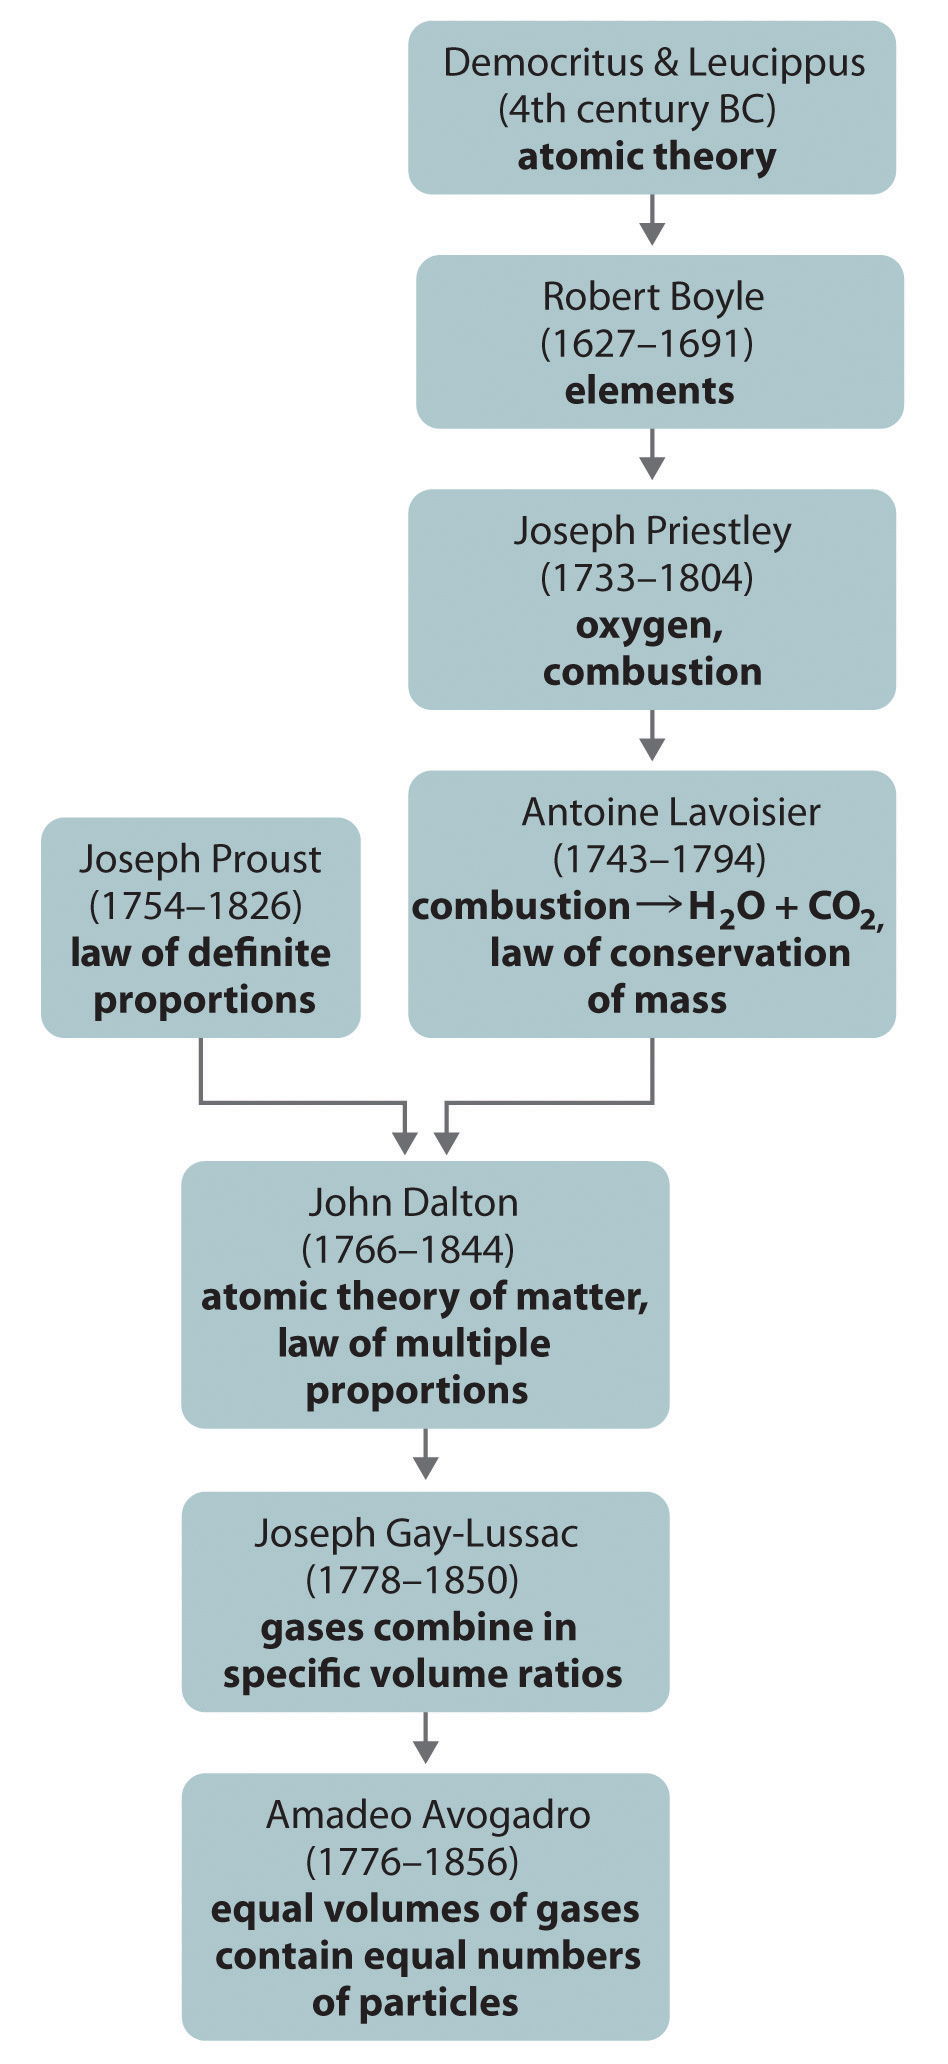 Democritus and Leucippus discovered atomic theory in the 4th century BC. Robert Boyle discovered elements (1627-1691). Joseph Priestly discovered oxygen and combustion (1733-1804). Antoine Lavoisier discovered that combustion creates carbon dioxide and water as well as the law of conservation of mass (1743-1794). Joseph Proust discovered the law of definite proportions (1754-1826). John Dalton discovered atomic theory of matter, and the law of multiple proportions (1766-1844). Joseph Gay-Lussac discovered gases combine in specific volume ratios (1778-1850). Amadeo Avogadro discovered equal volumes of gases contain equal numbers of particles (1776-1856).